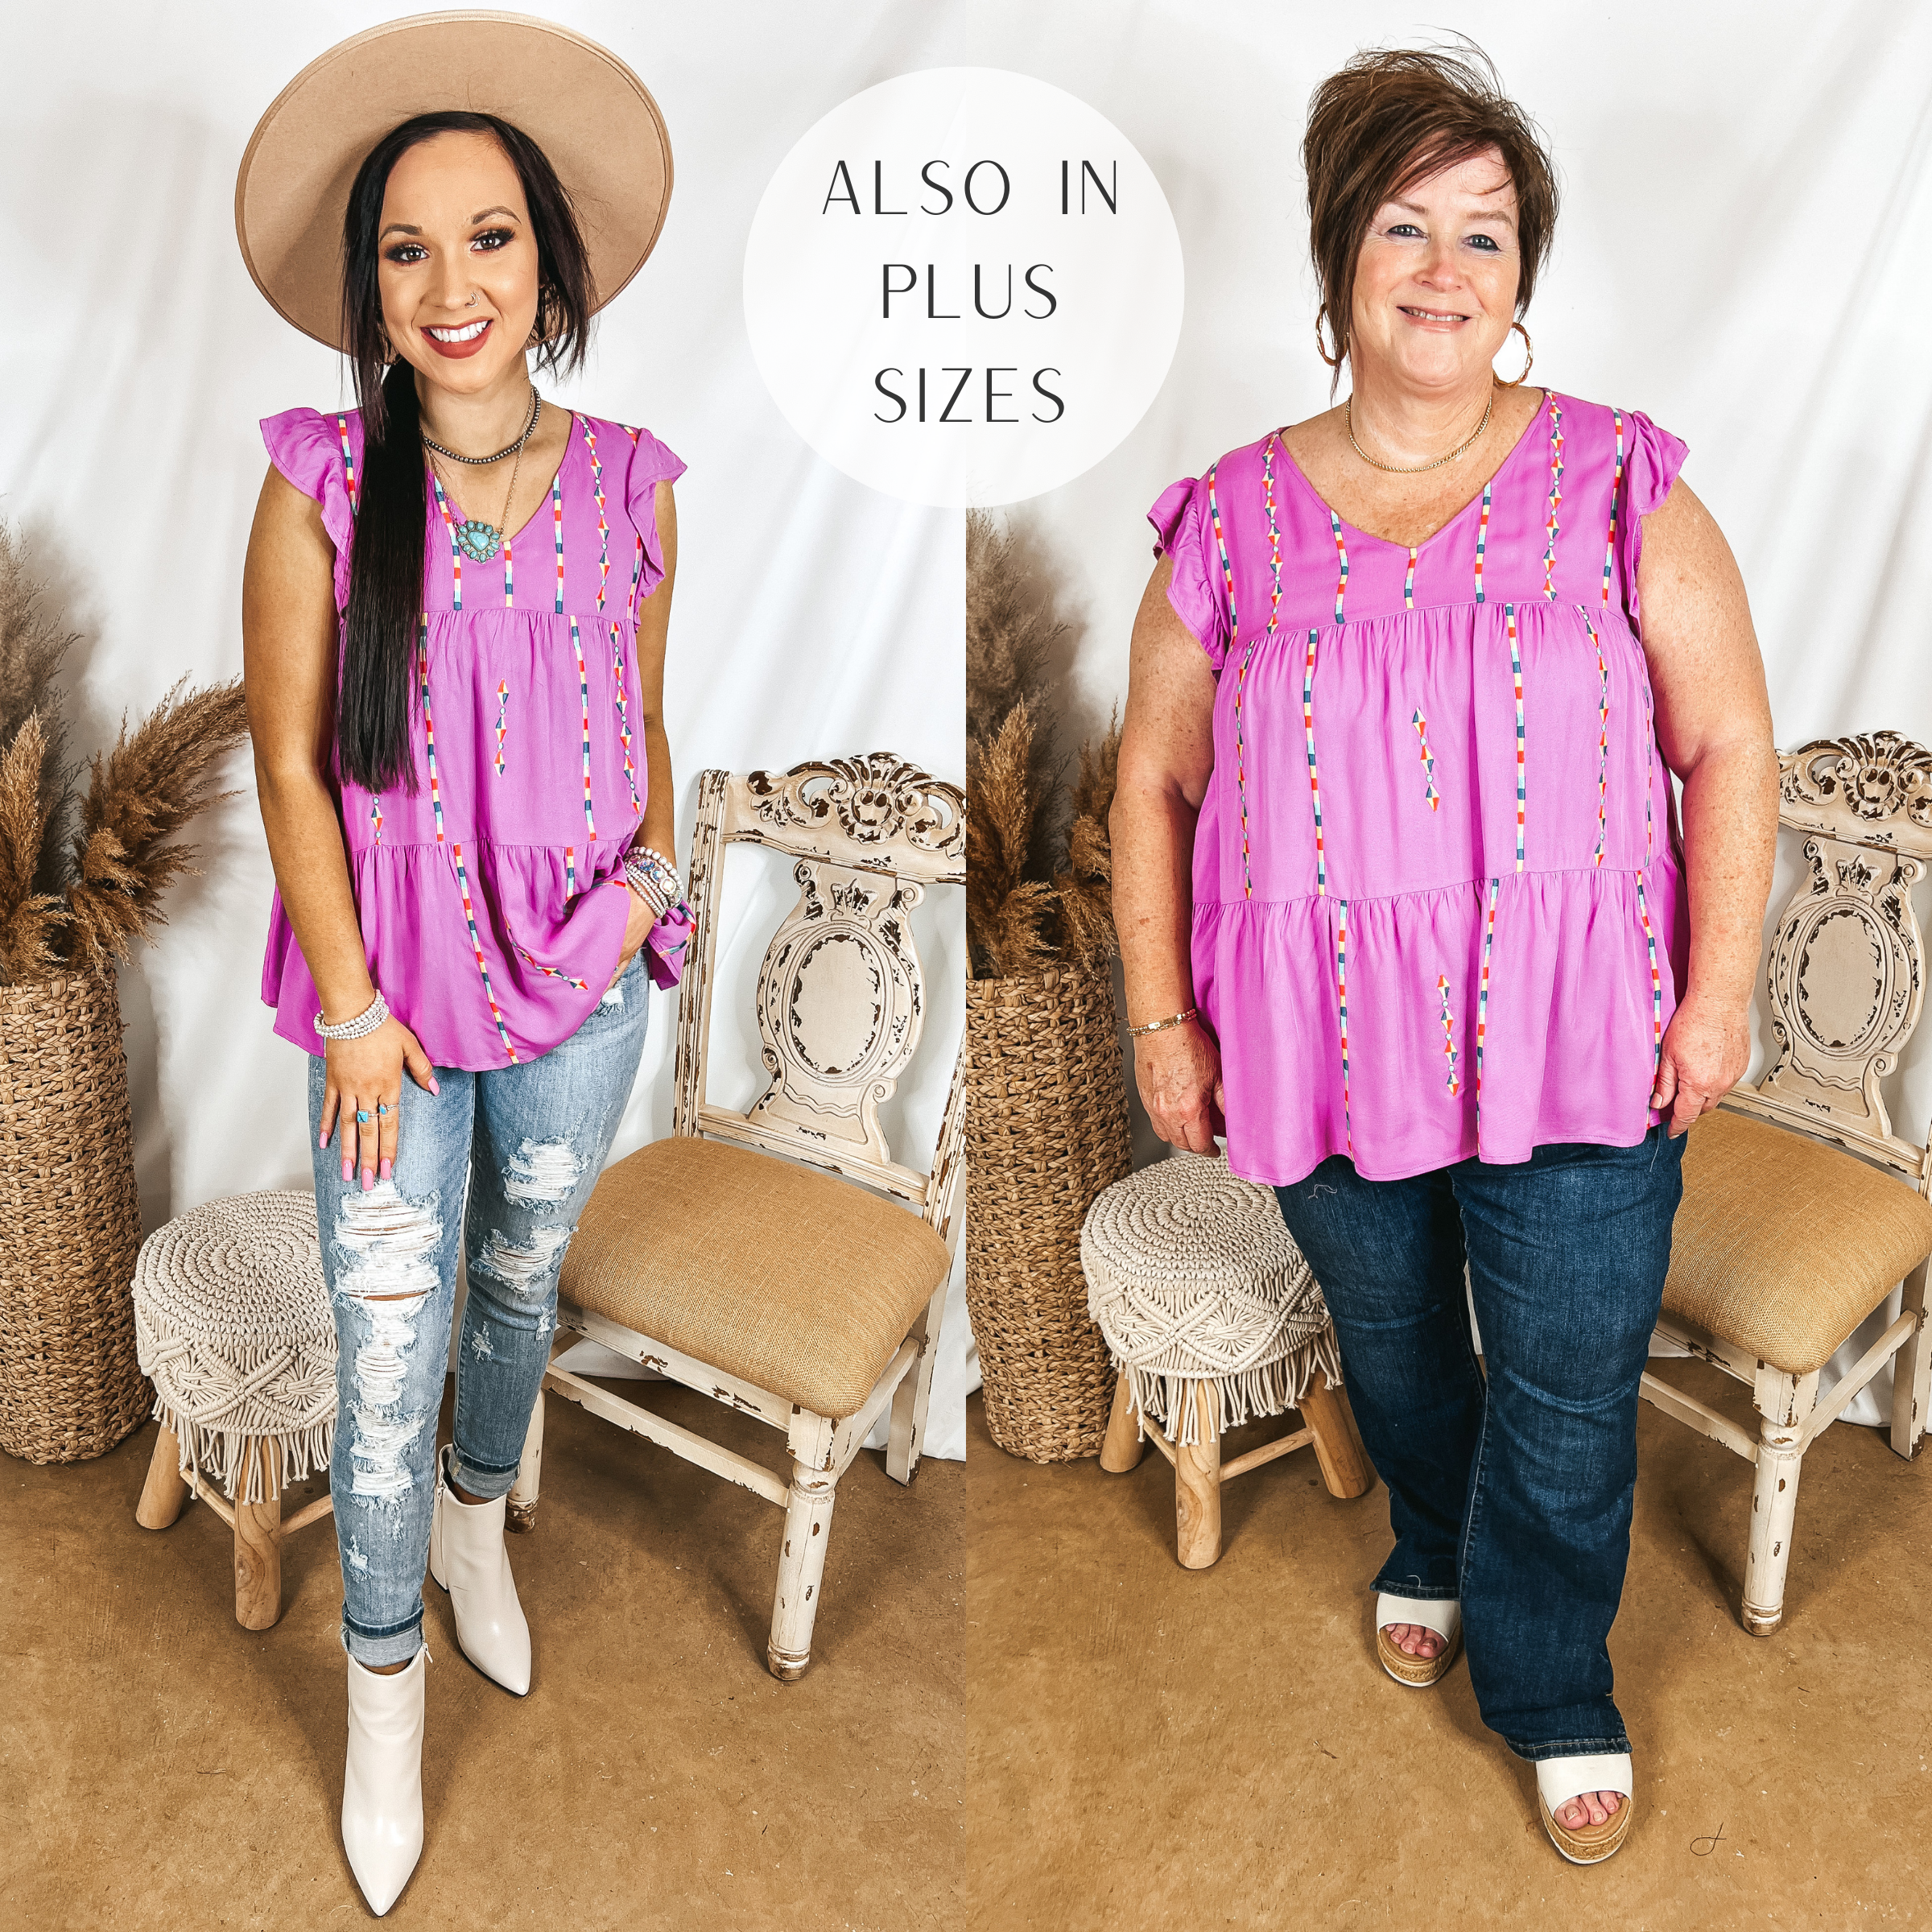 Models are wearing an embroidered purple top. Size small model has it paired with distressed light wash jeans, white booties, and a tan hat. Plus size model has it paired with dark wash bootcut jeans, white sandals, and gold jewelry.